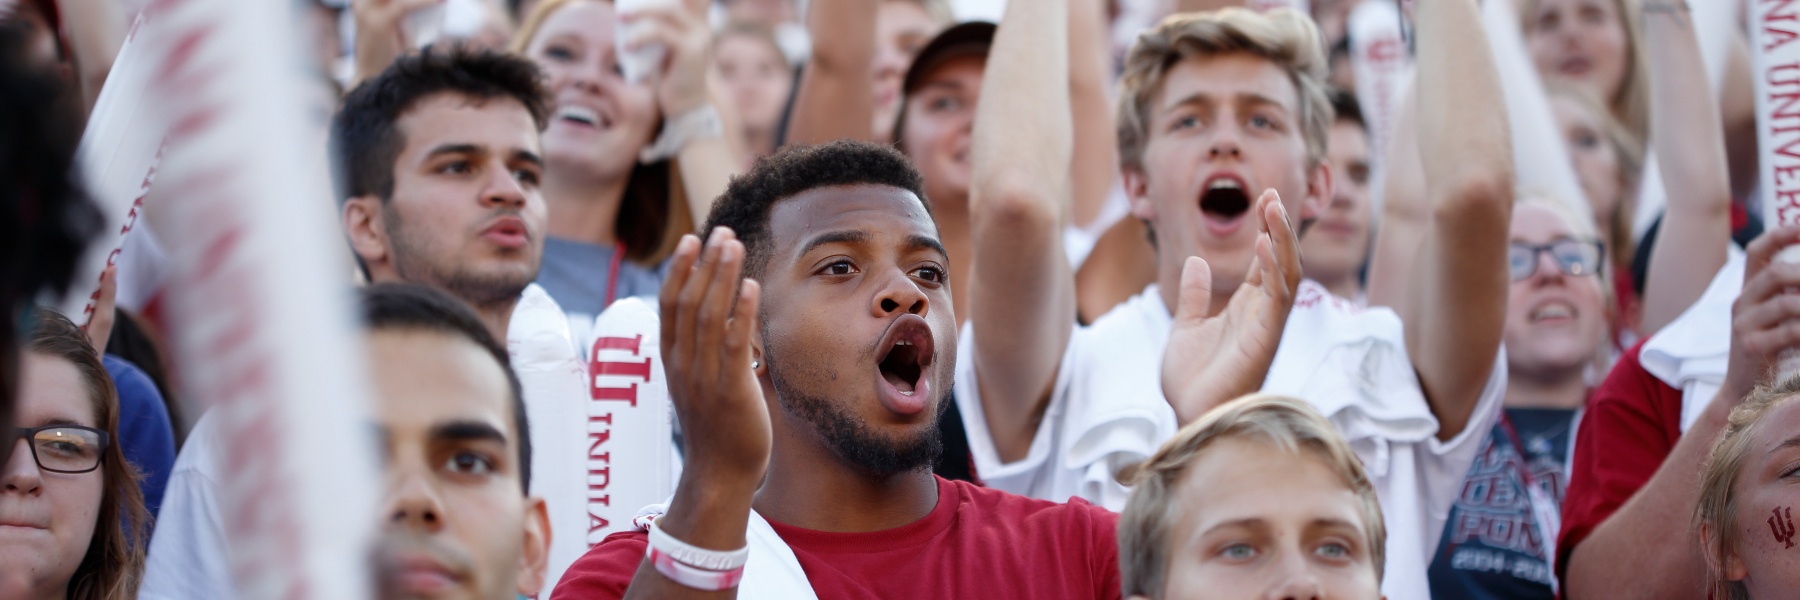 Students cheering with IU gear at the freshman pep rally in 2017